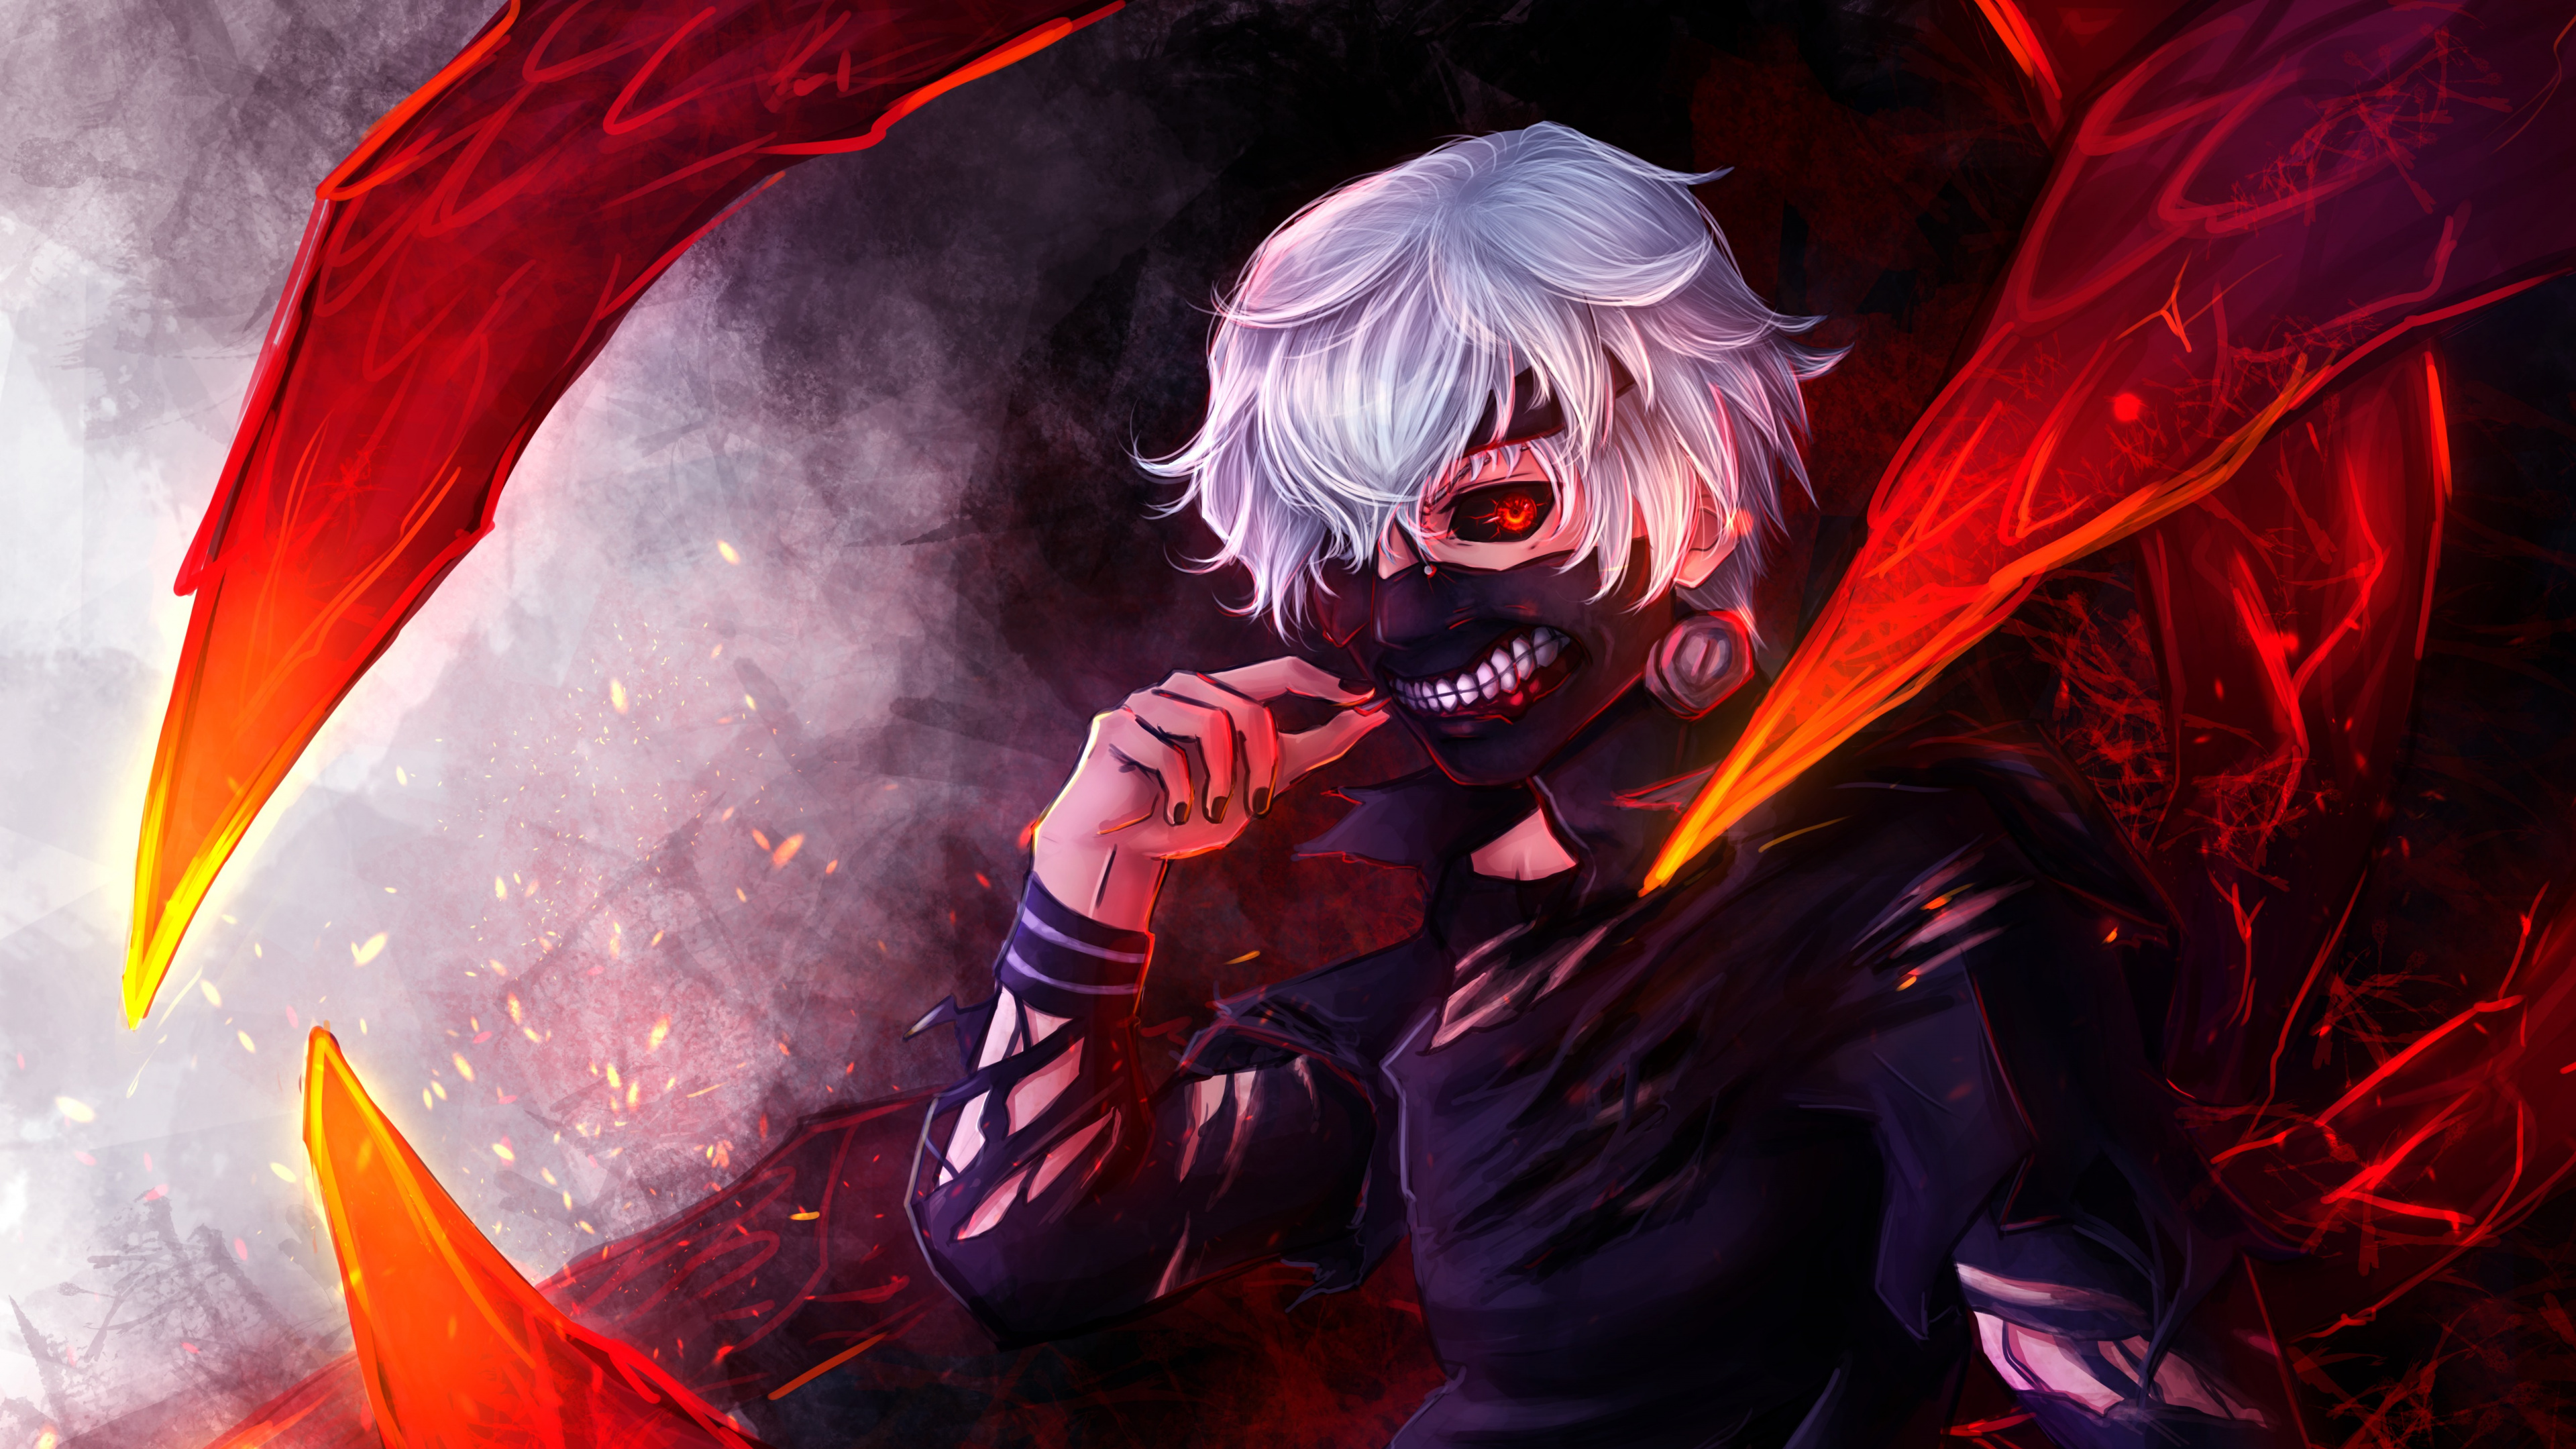 Man in Black and Red Suit Anime Character. Wallpaper in 3840x2160 Resolution